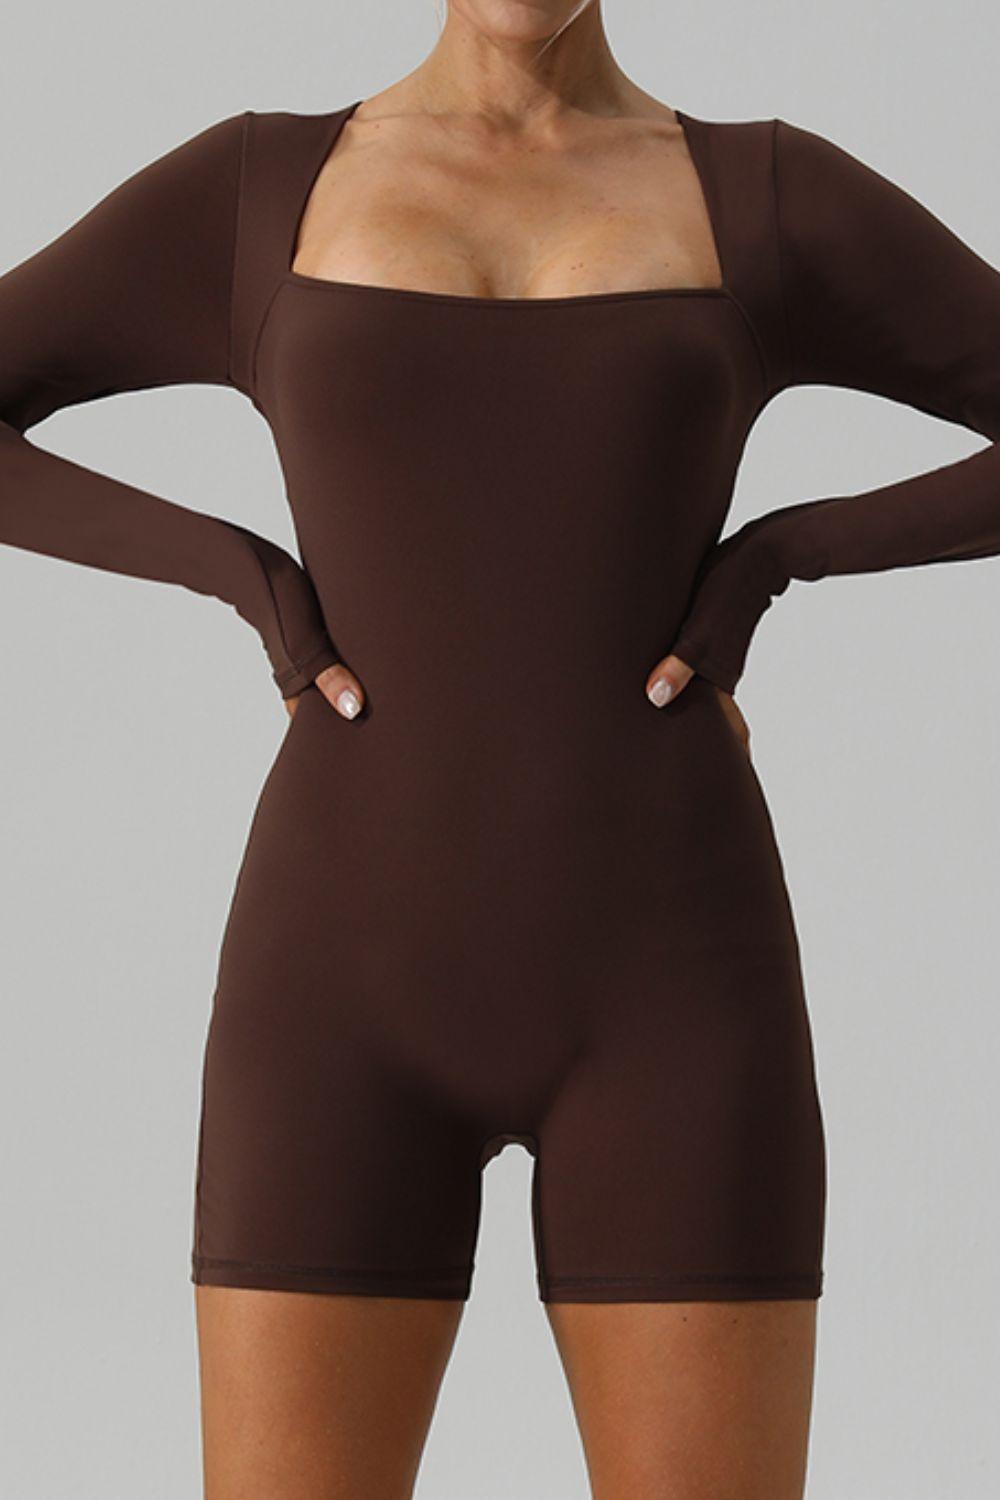 a woman in a brown bodysuit posing for the camera